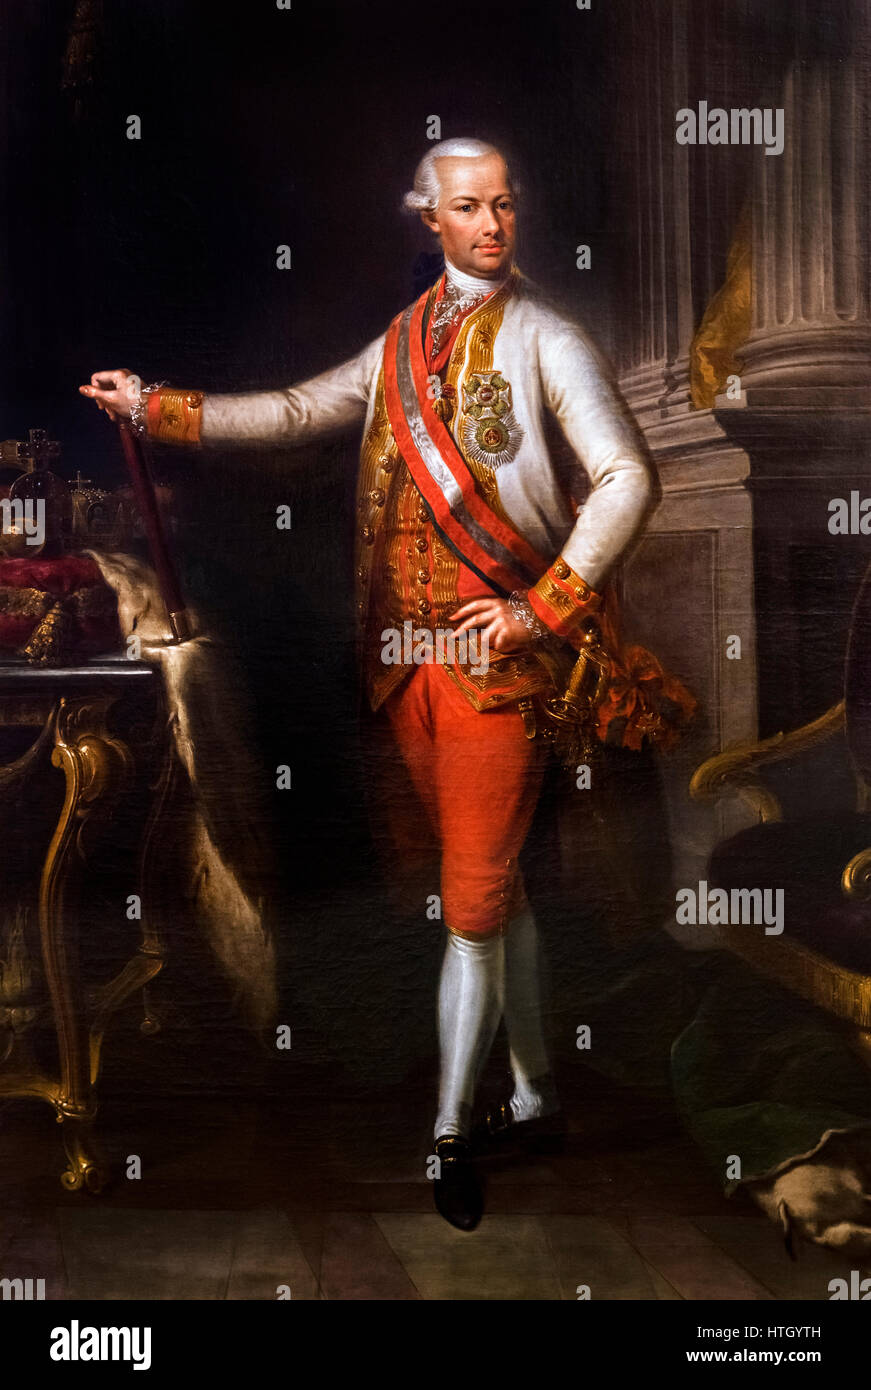 Leopold II (1747-1792), Holy Roman Emperor, King of Hungary and Bohemia, Archduke of Austria and Grand Duke of Tuscany. Portrait by unknown artist, oill on canvas, c.1790. Stock Photo